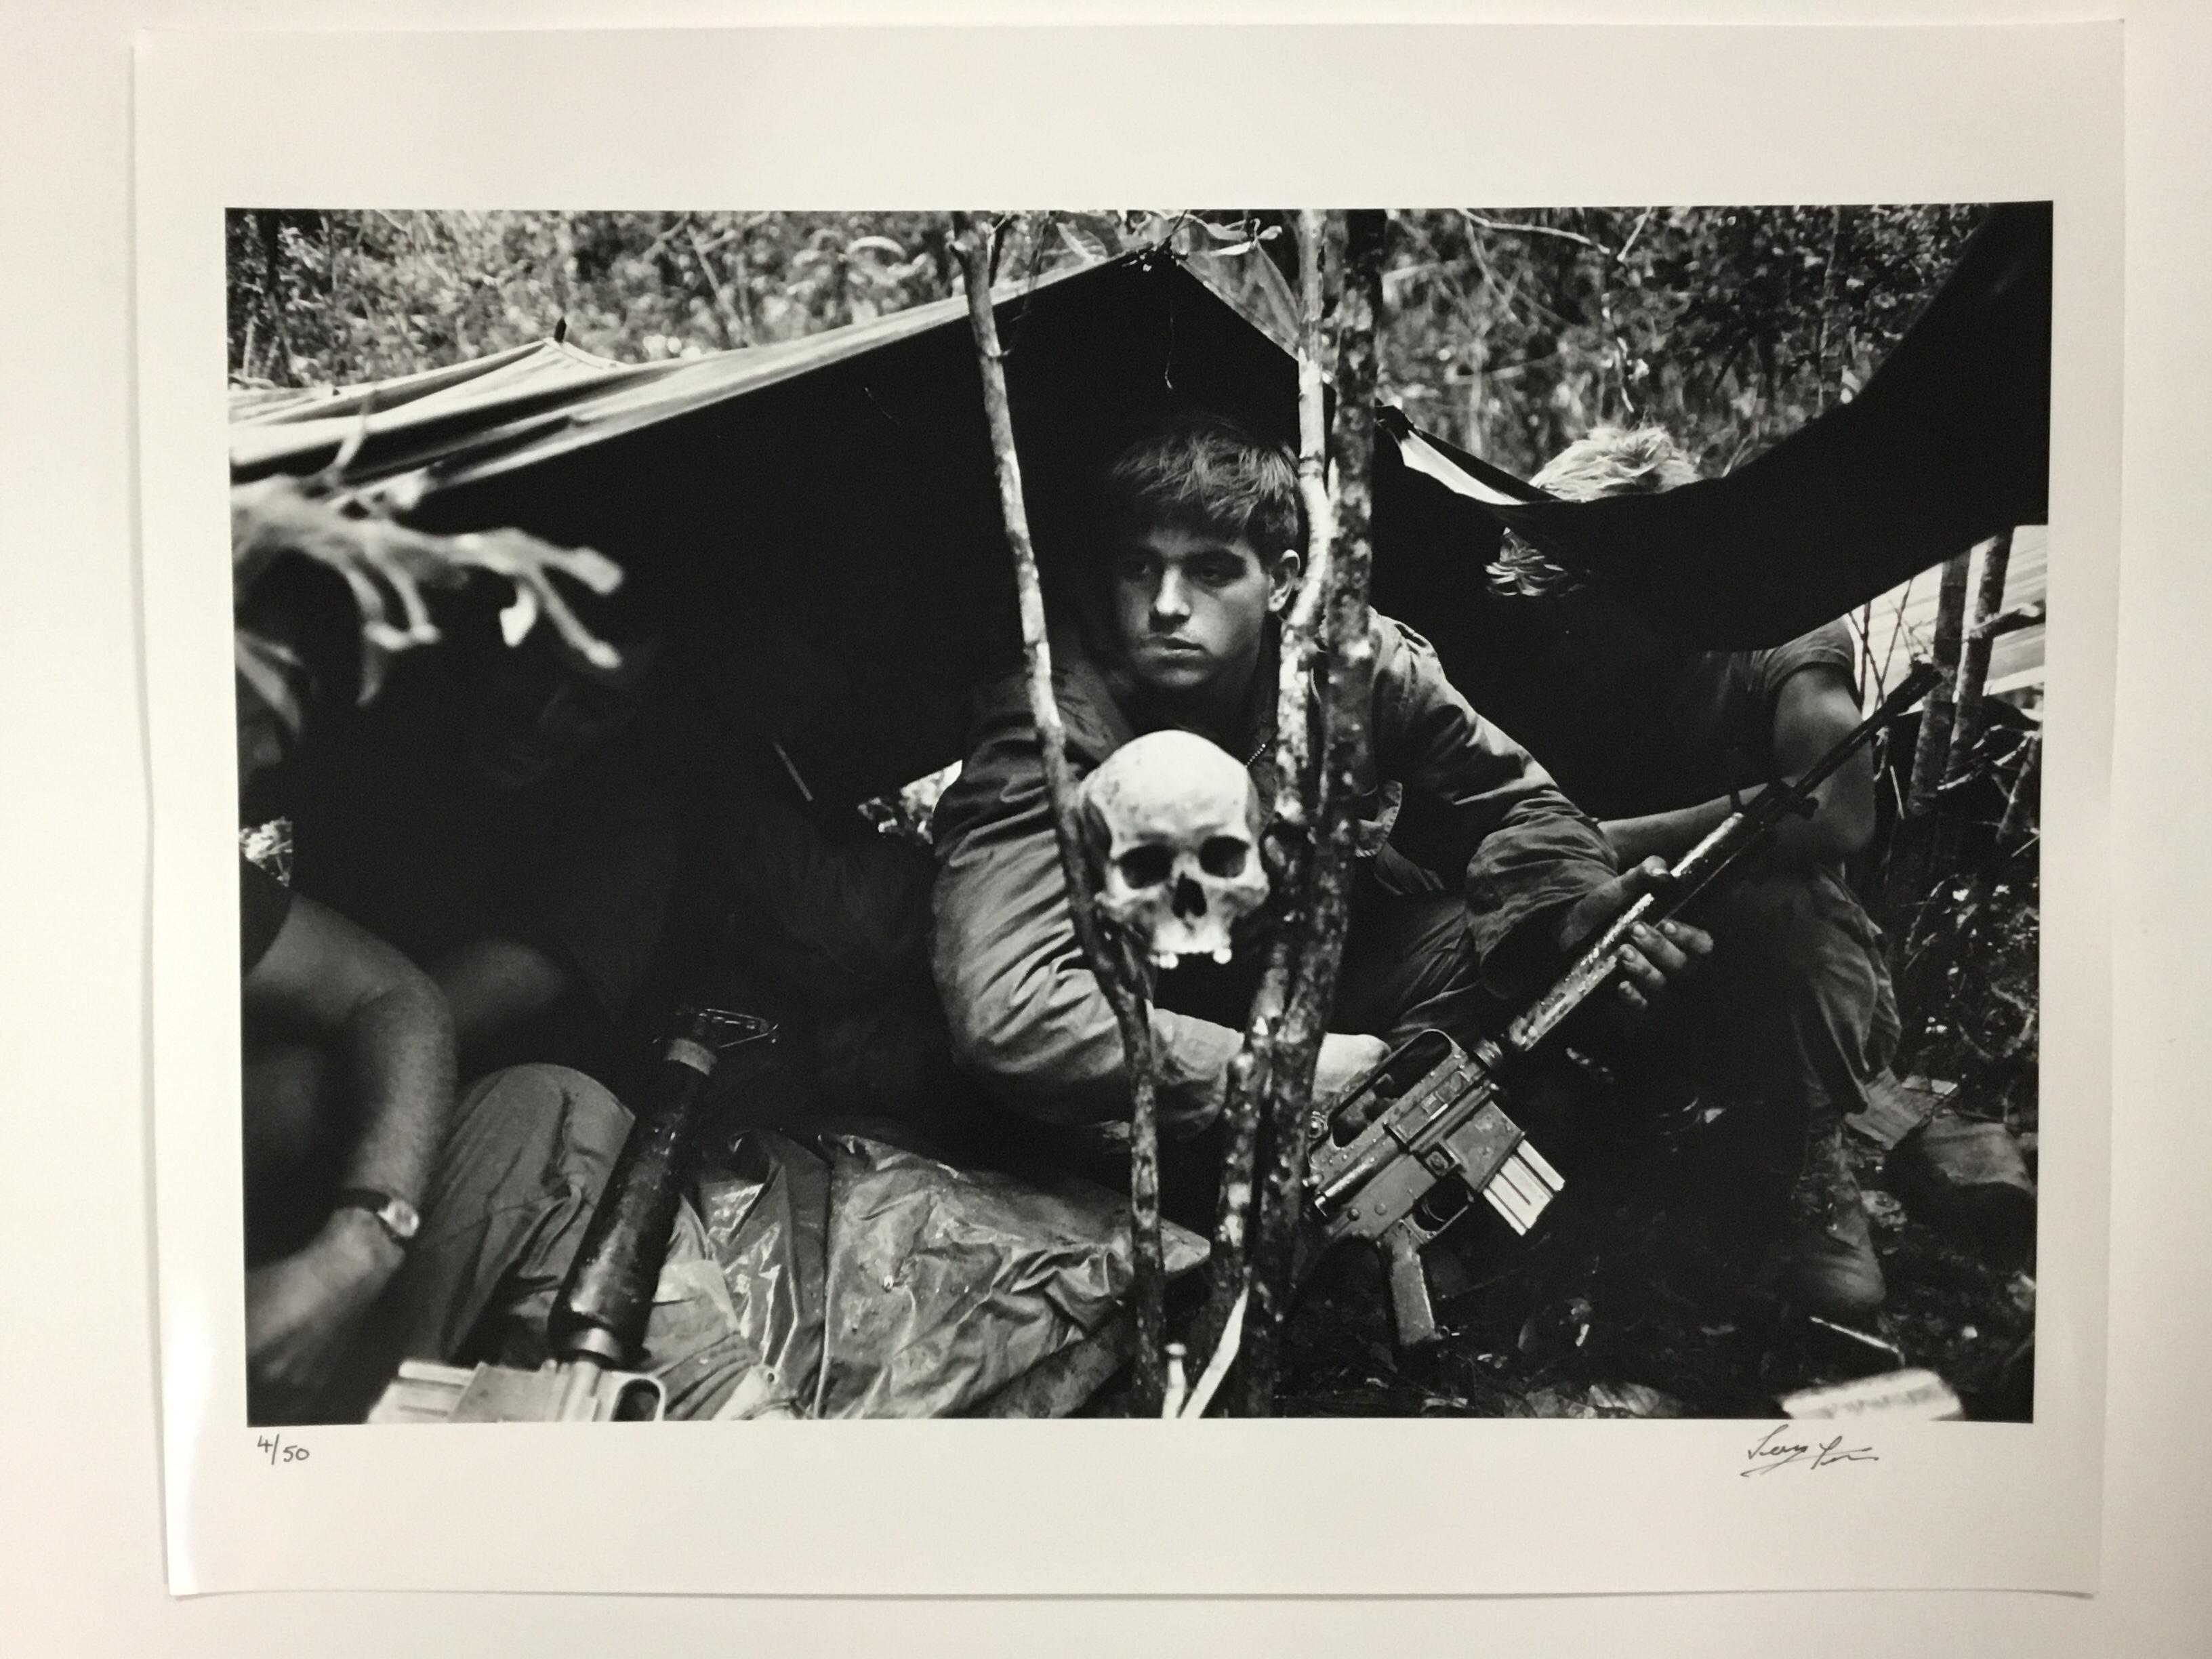 A human skull keeps watch over US soldiers encamped in the Vietnamese jungle during the Vietnam War. October 25, 1968 (Photo by Terry Fincher/Getty Images)

DETAILS
- Rare signed print, signature on front.
- Hand printed silver gelatin fibre